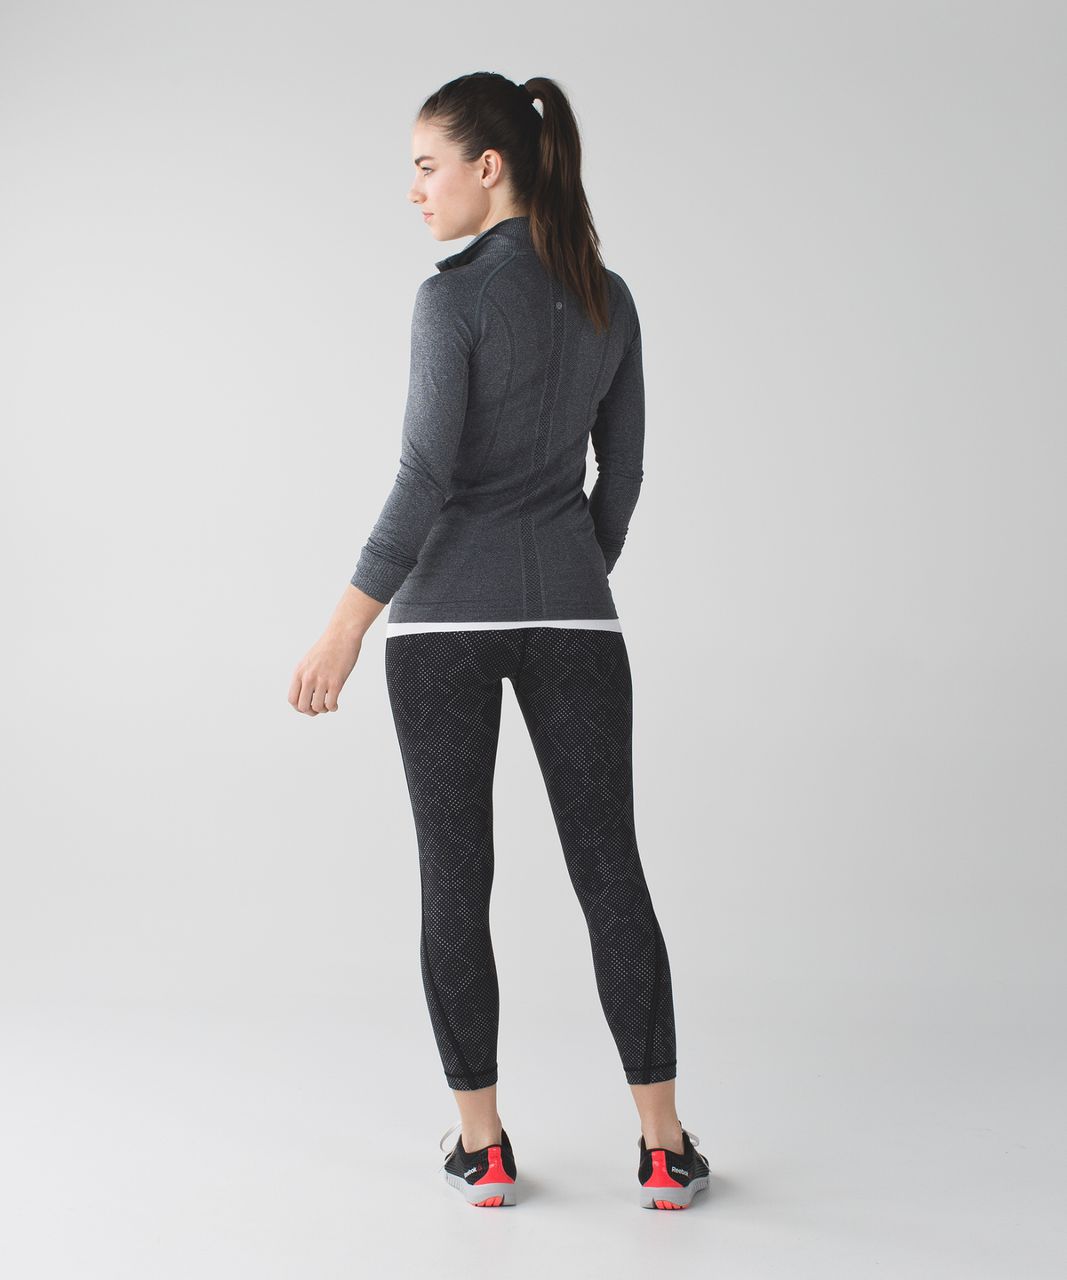 Lululemon Women Solid Black Drawstring 27 4-Way Luxtreme On the Fly 7/8 Pant  10